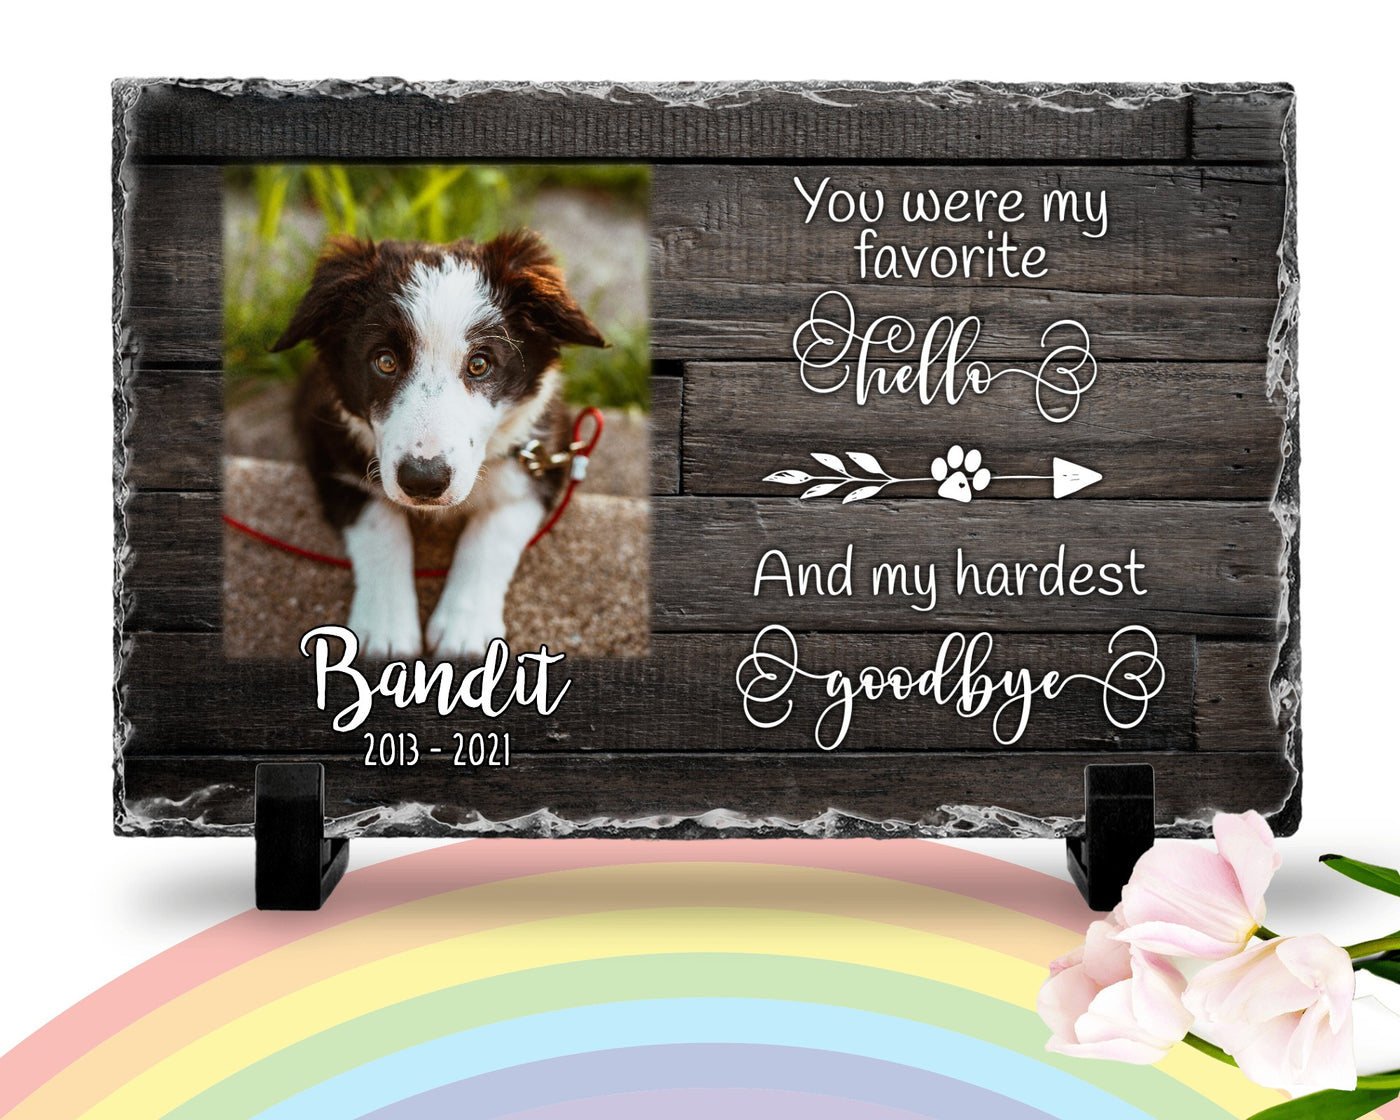 Personalized Dog Memorial   You Were My Favorite Hello and My Hardest Goodbye  Personalized Picture Keepsake Memorial Slates